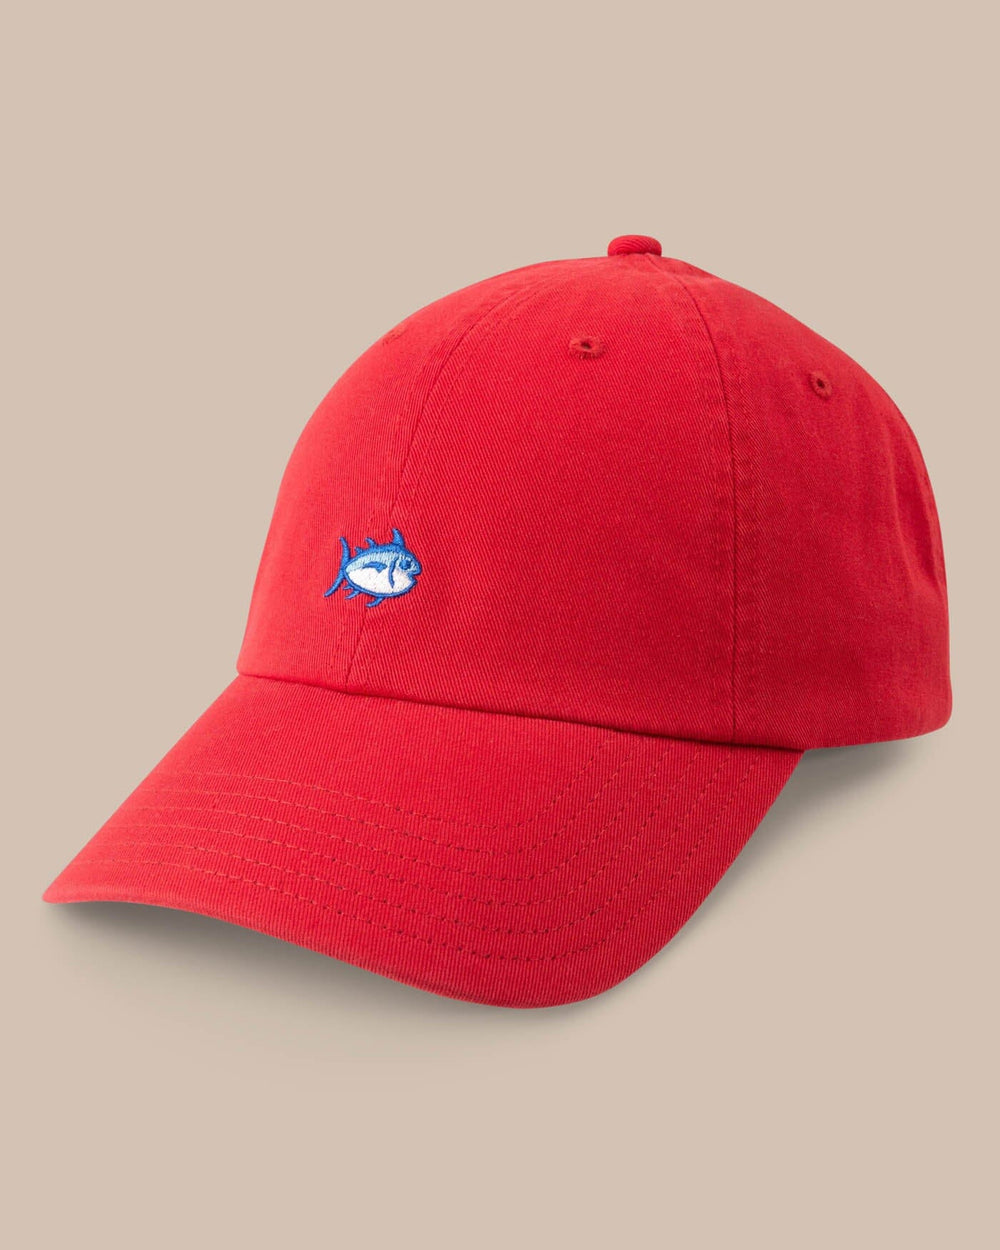 The front view of the Team Colors Skipjack Hat by Southern Tide - Varsity Red